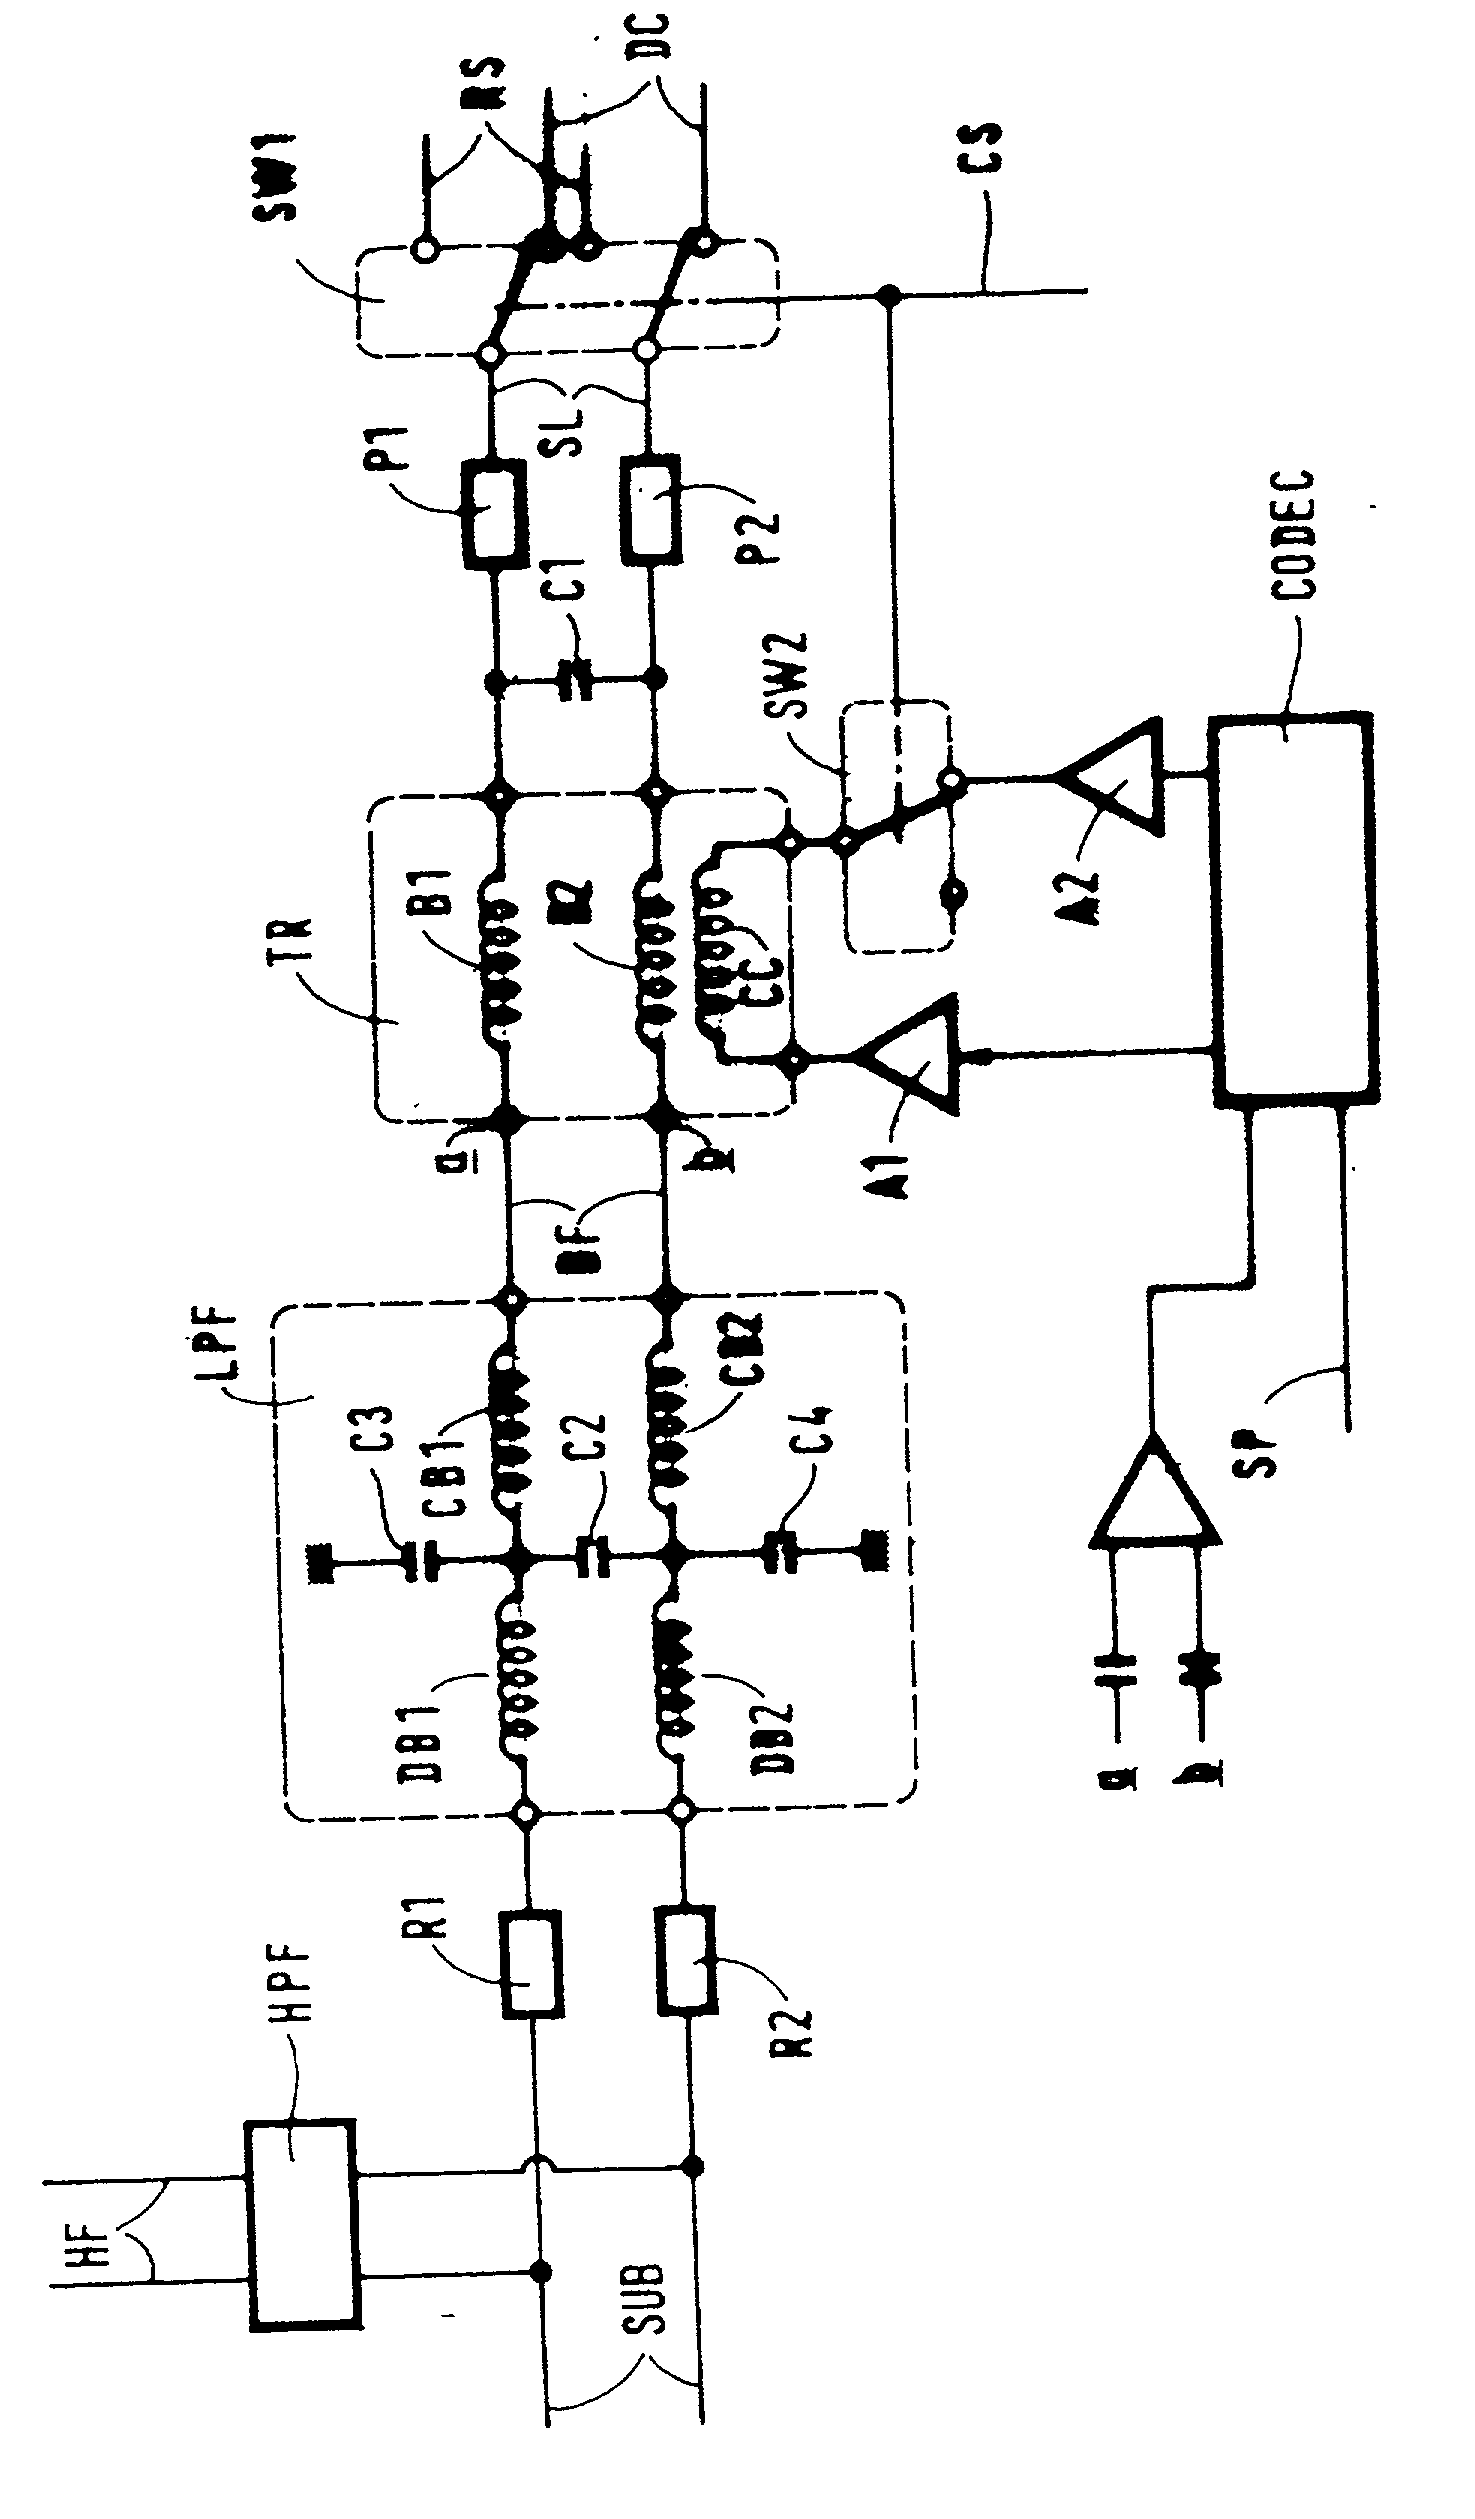 Device for connecting a subscriber line to a high frequency link and to a low frequency link